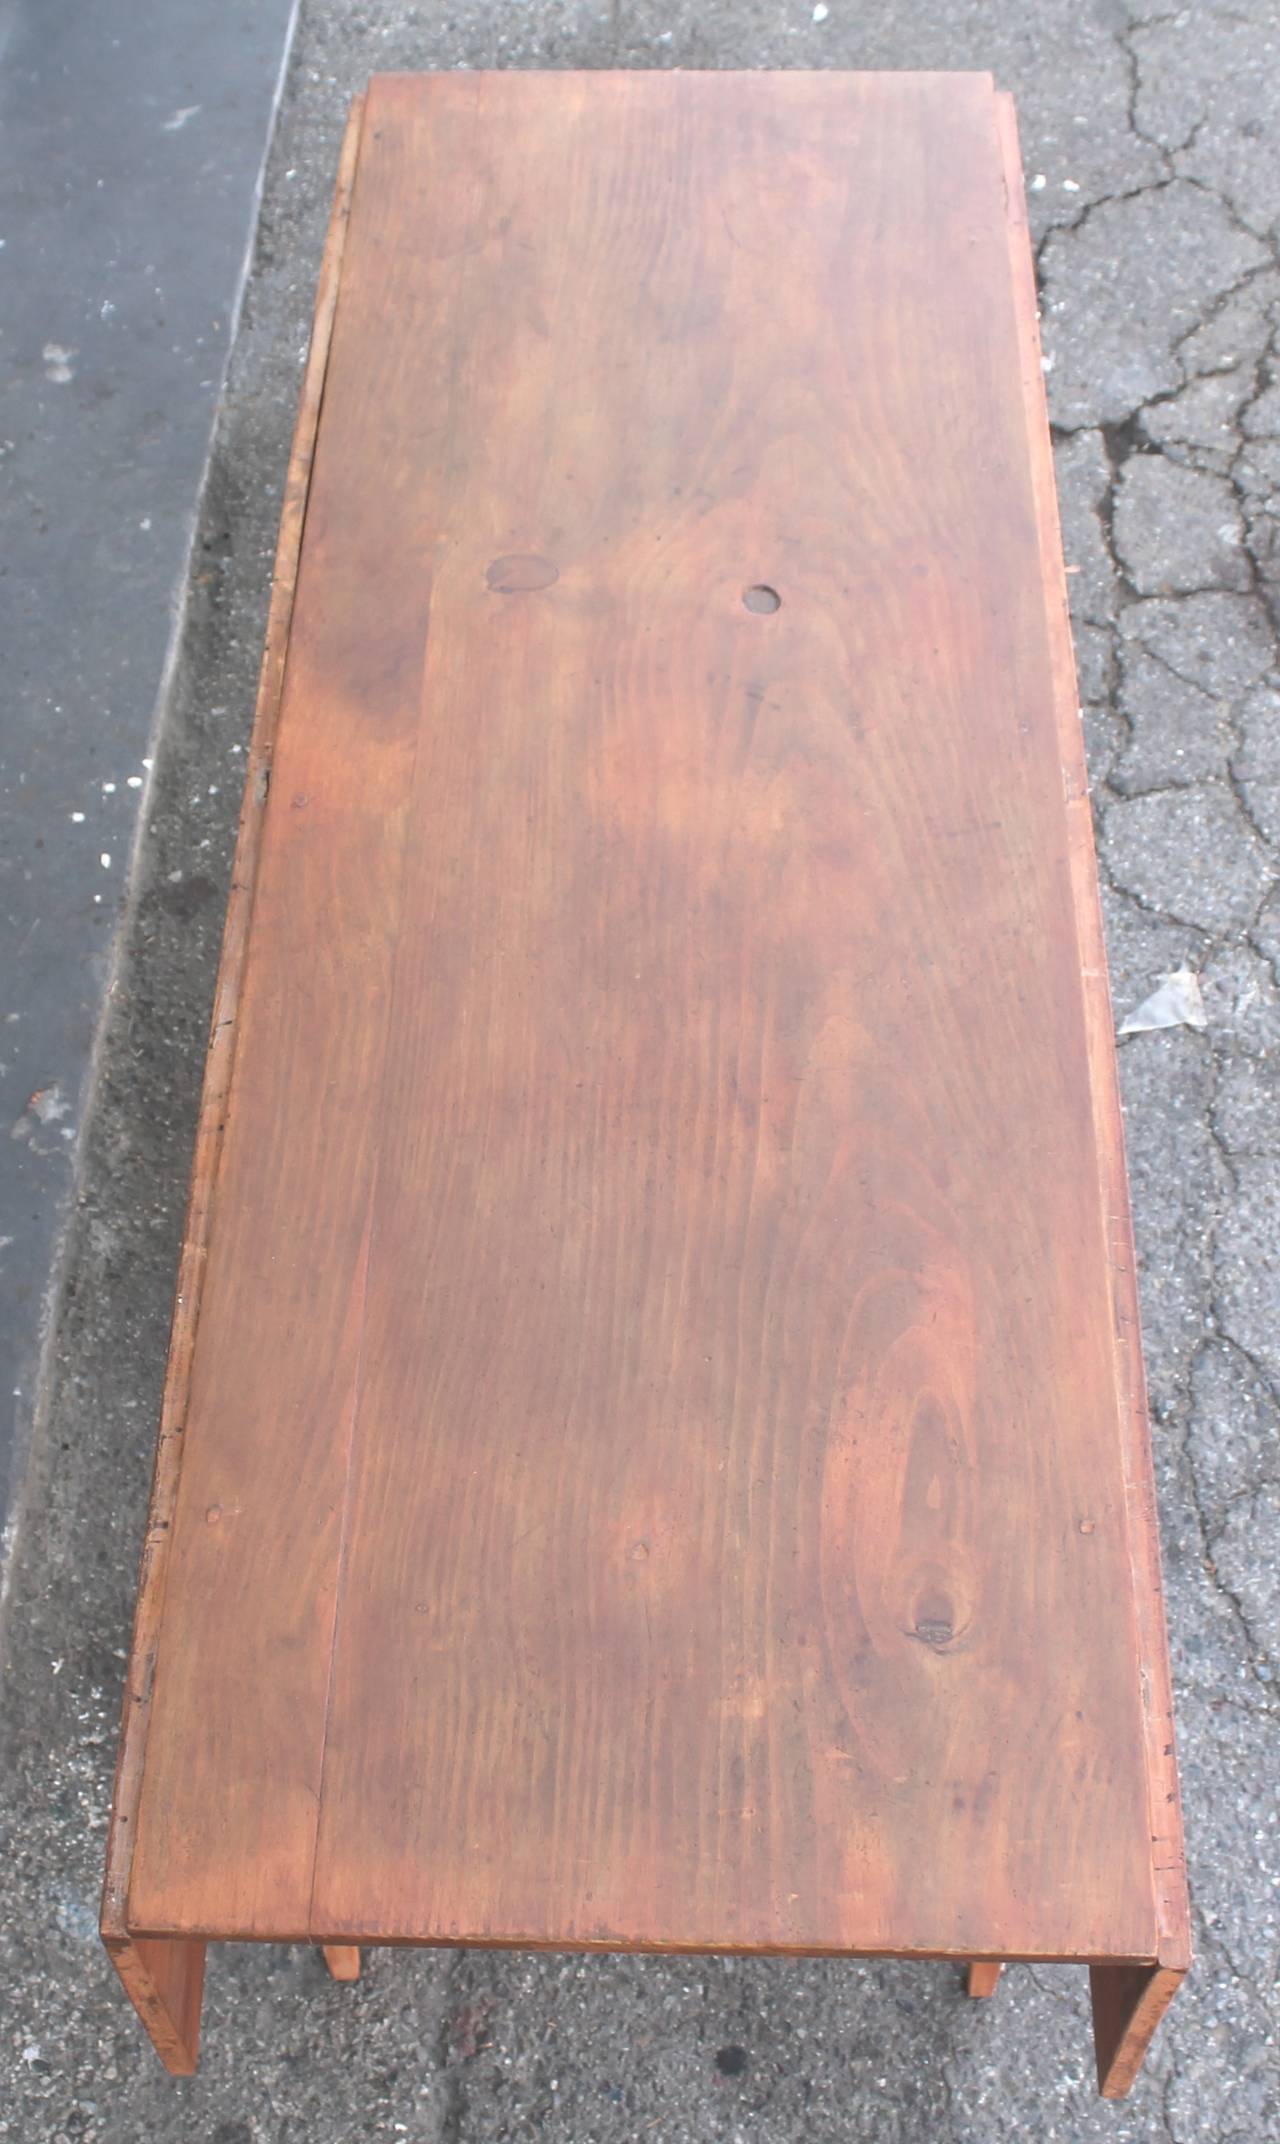 This finely constructed early 19th century pine original salmon painted base with a scrub top farm table also has drop leaf ends. It's a great table that seats six to eight people comfortably. This New England harvest or farm table also would make a